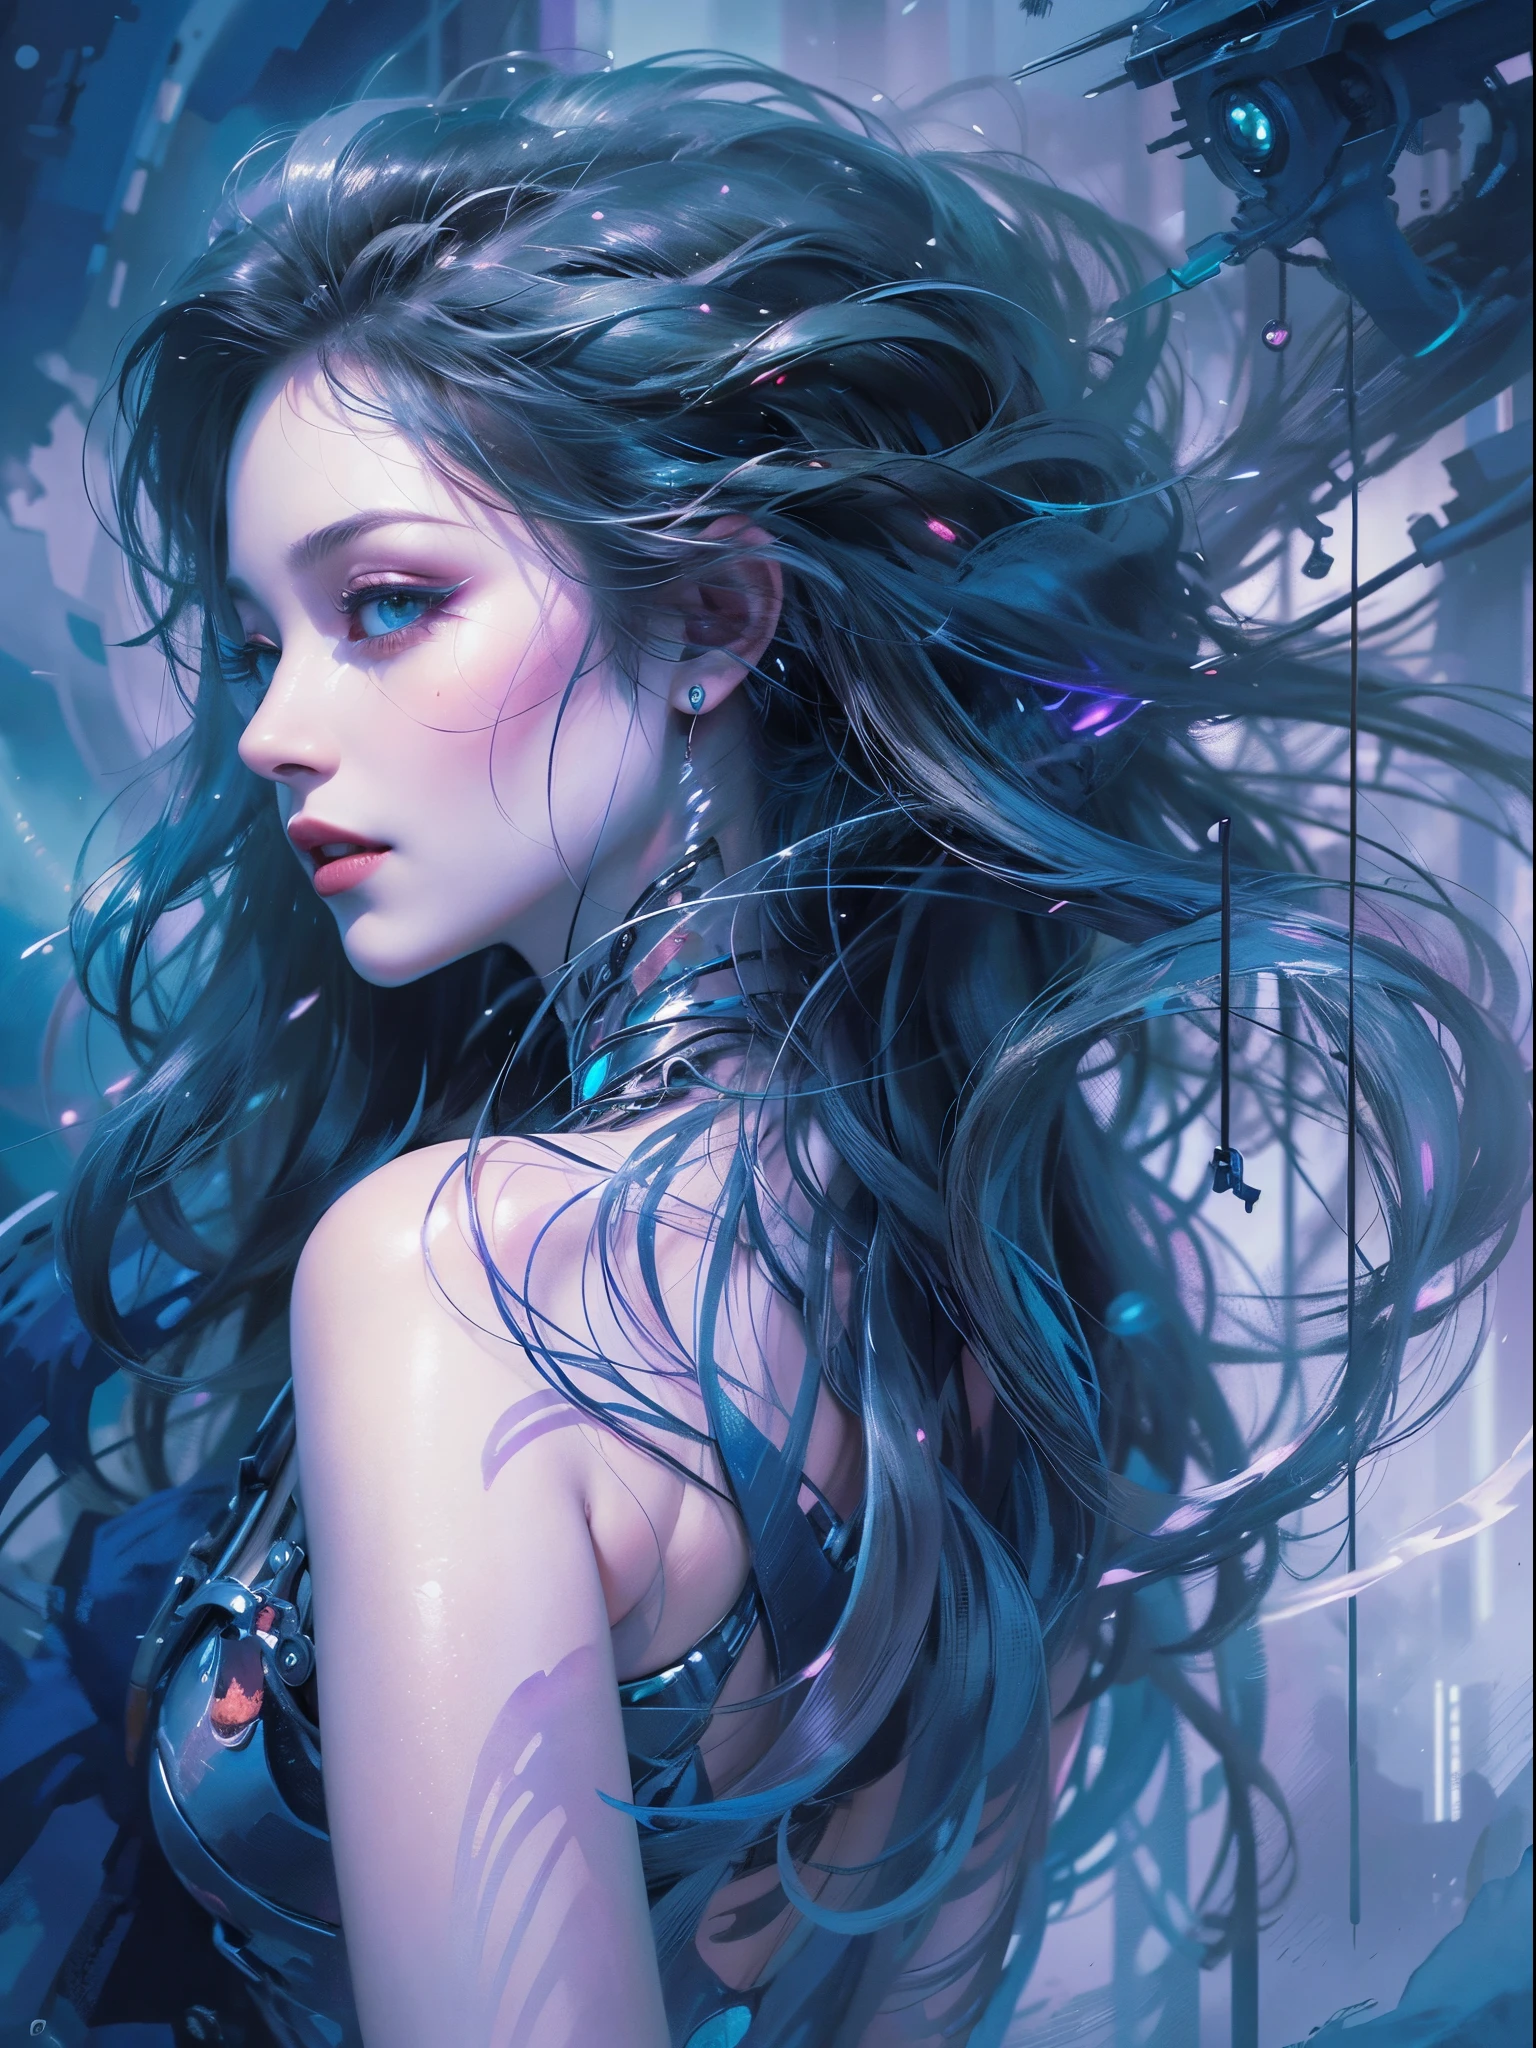 Young beautiful woman, long hair, elegant, too beautiful, In a mesmerizing watercolor painting, a cyberpunk vampire reigns, portrayed as a figure of ethereal beauty and dark mystique. The artwork captures the graceful yet mysterious essence of this immortal being, with their hairstyle twisted color black and snow- white, flowing in the wind and eyes shining with an otherworldly glow. Delicate strokes of vibrant blues and purples bring life to their metallic cybernetic enhancements, seamlessly blending the futuristic with the fantastical. This extraordinary image was skillfully created with meticulous attention to detail, evoking a sense of wonder and intrigue in the viewer. highly realistic, ruddy skin, beautiful, full lips, smiling, feeling of lightness and joy, hyperrealism, skin very elaborated, direct gaze